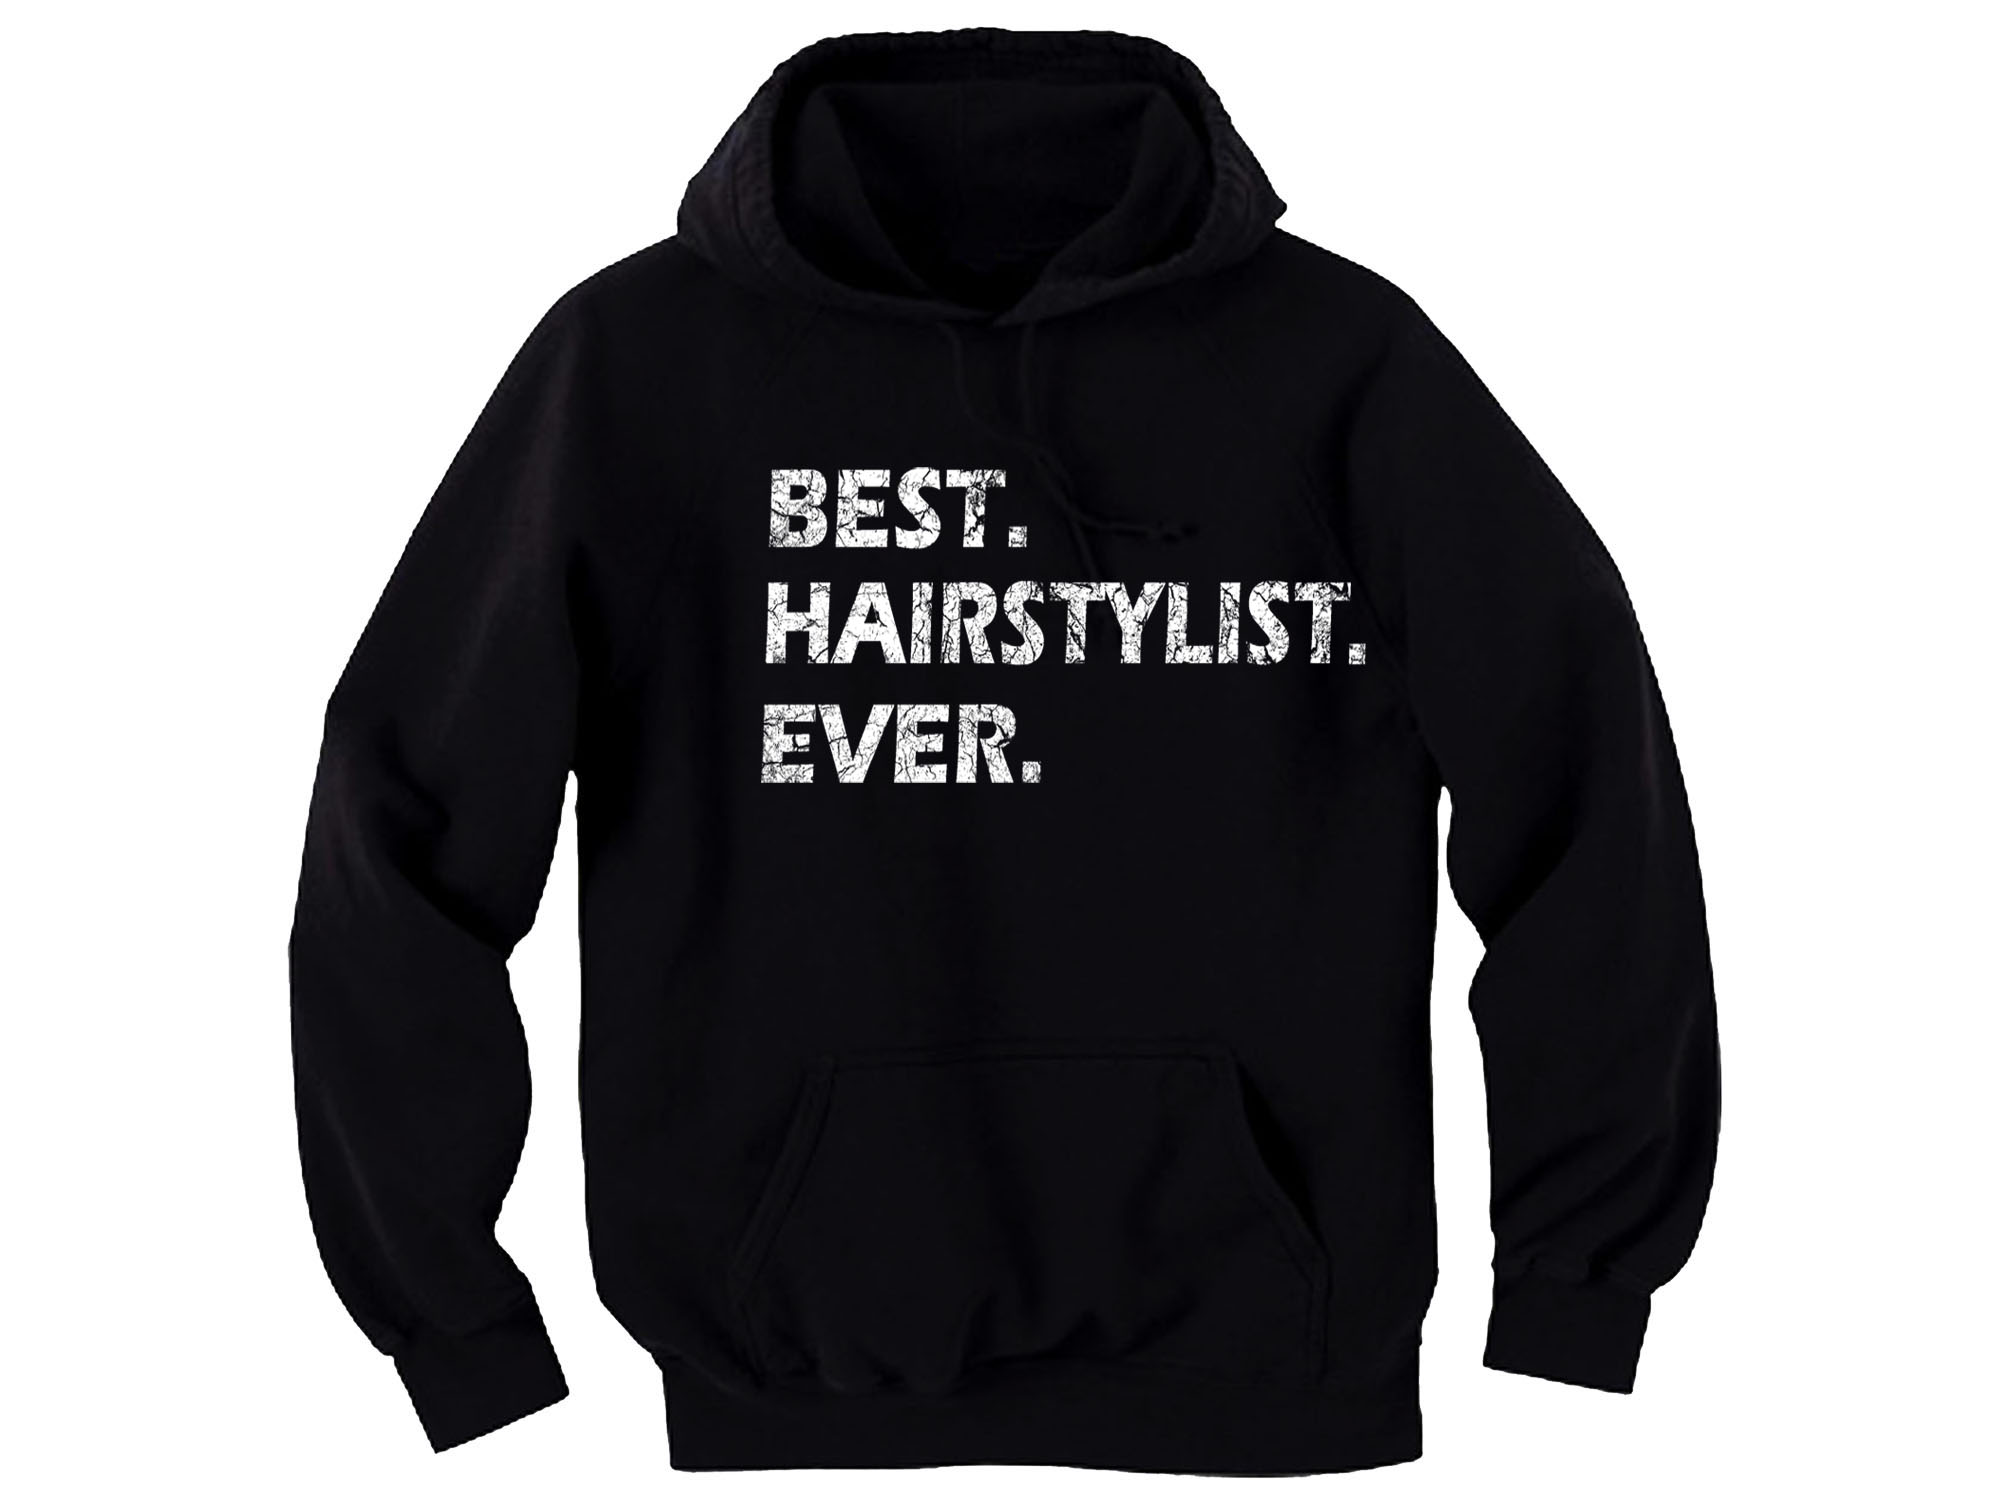 Best hairstylist ever distressed print hoodie Great Gift!!!